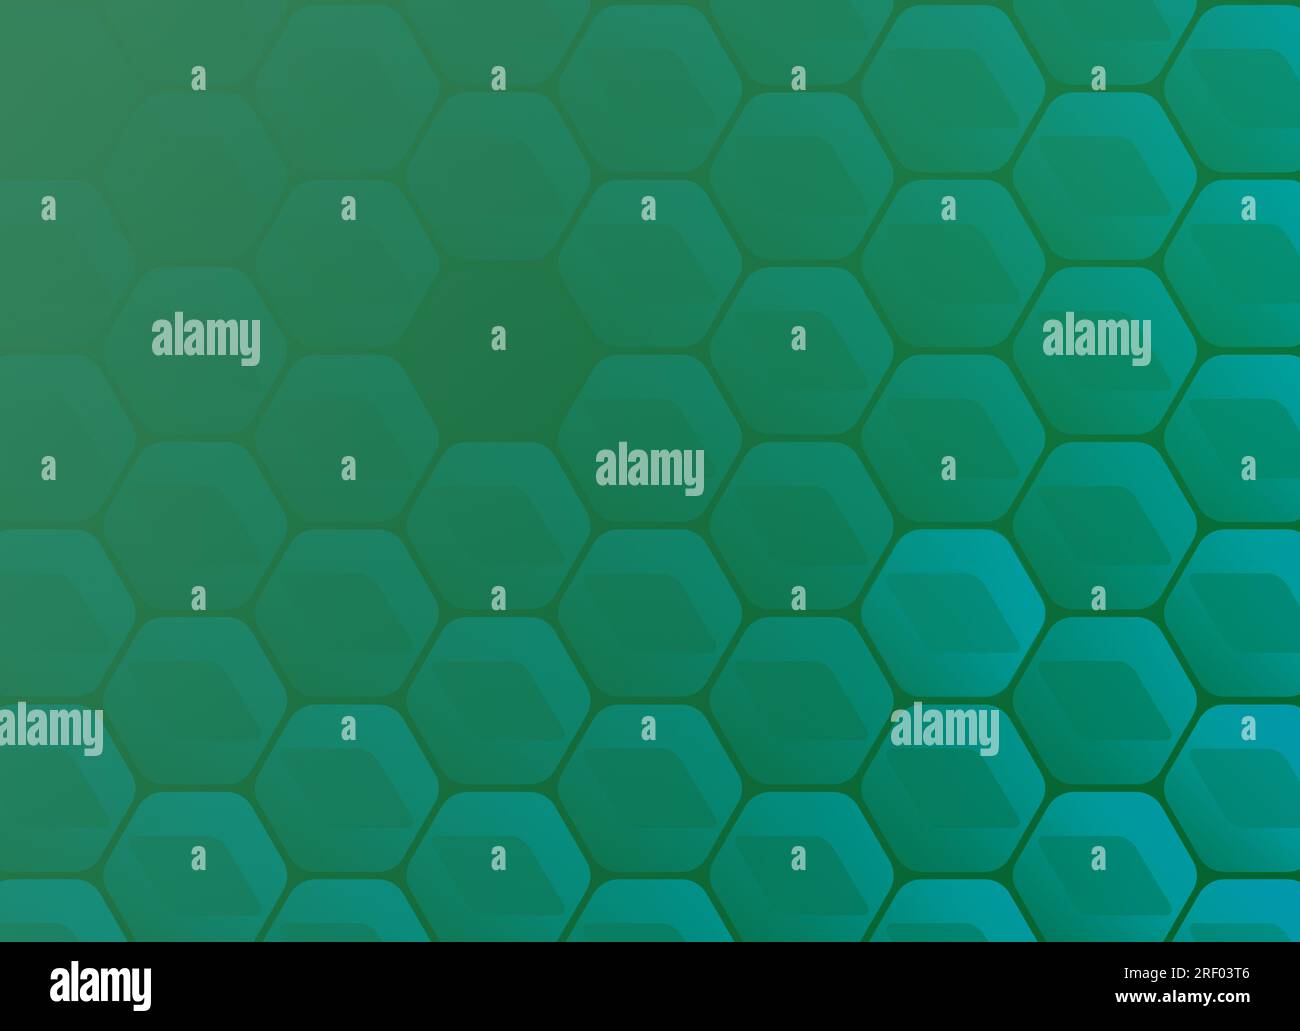 Modern geometric cyan hexagons on green-cyan background. Abstract technology background. Full frame geometric honeycomb pattern with copy space. Stock Photo